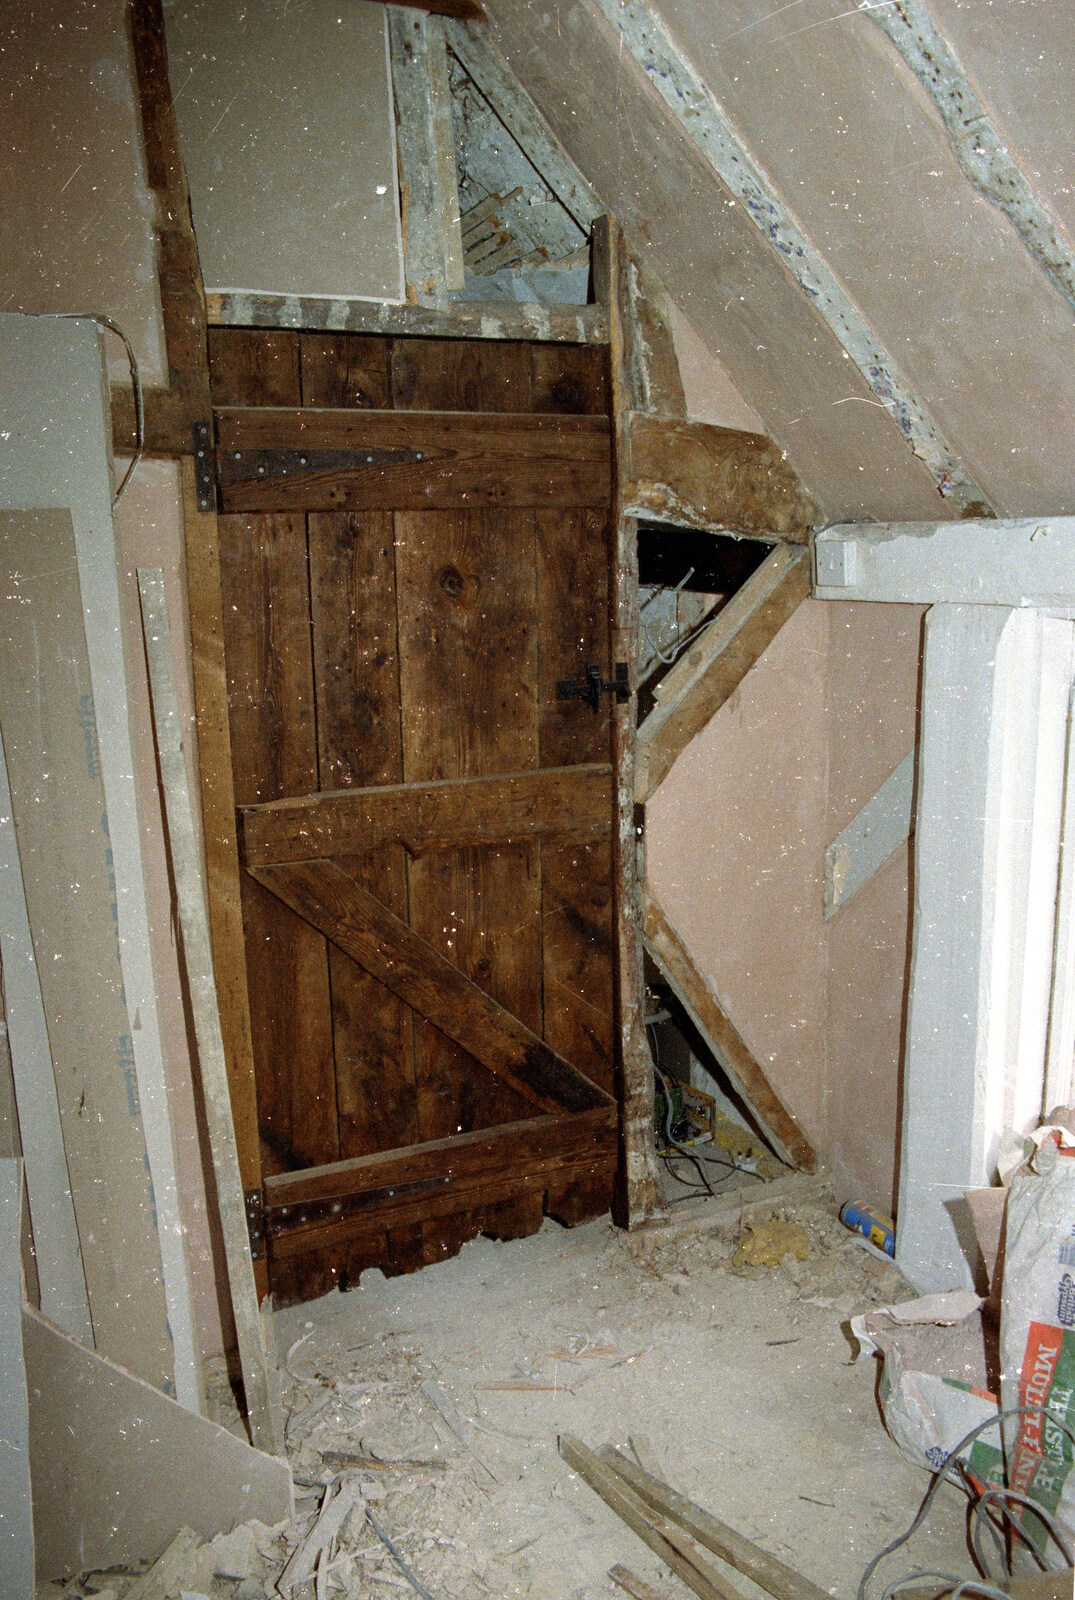 A bedroom door, made out of old bits of wood from Geoff's old piggery from Bedroom Demolition, Brome, Suffolk - 10th October 1994